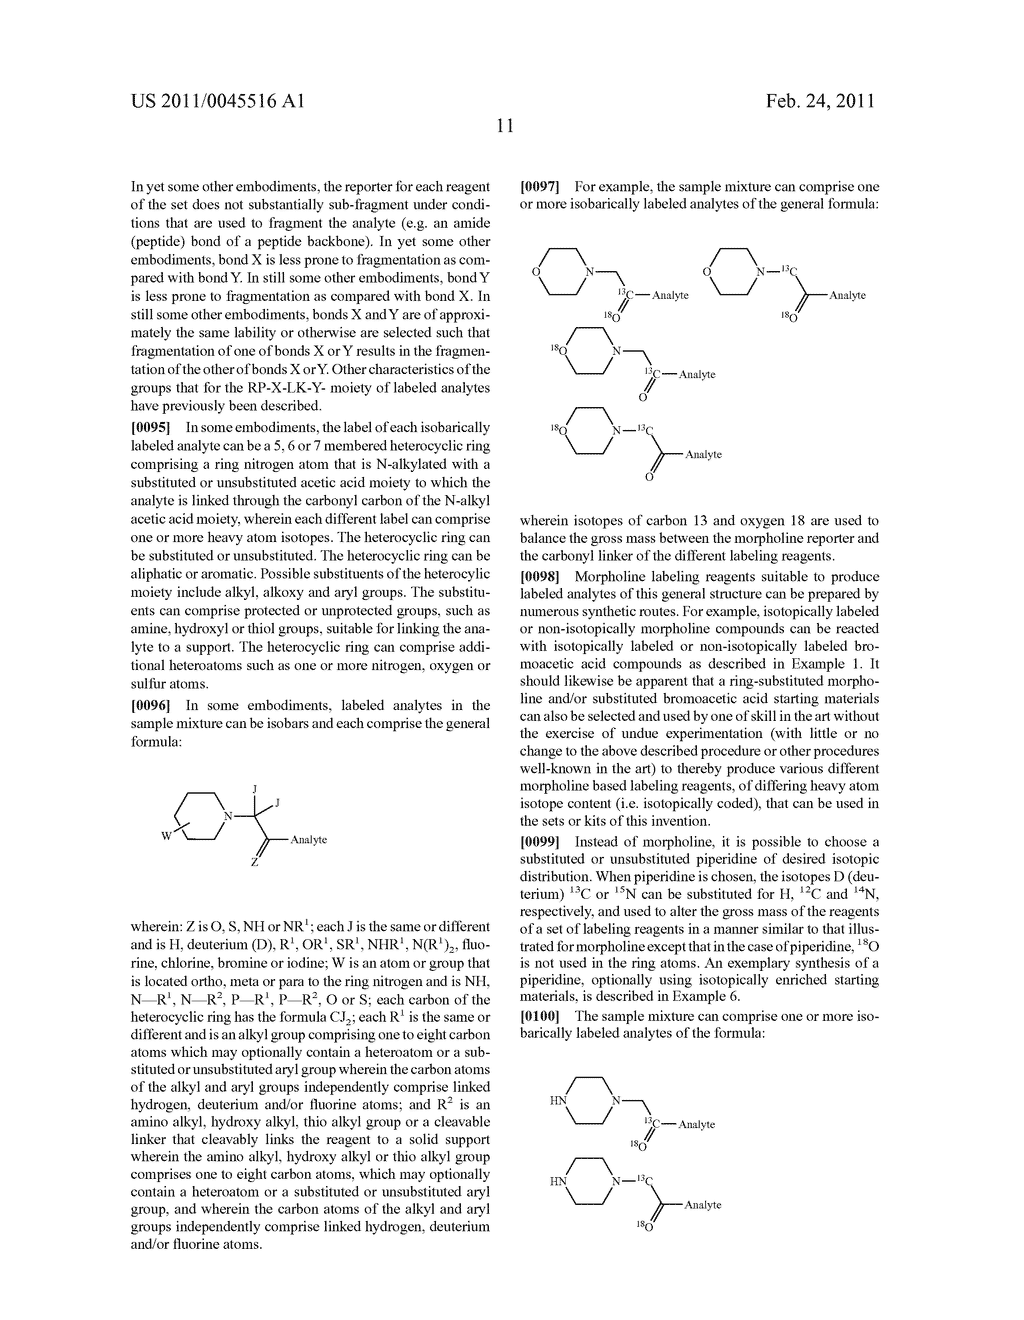 Kits Pertaining to Analyte Determination - diagram, schematic, and image 25